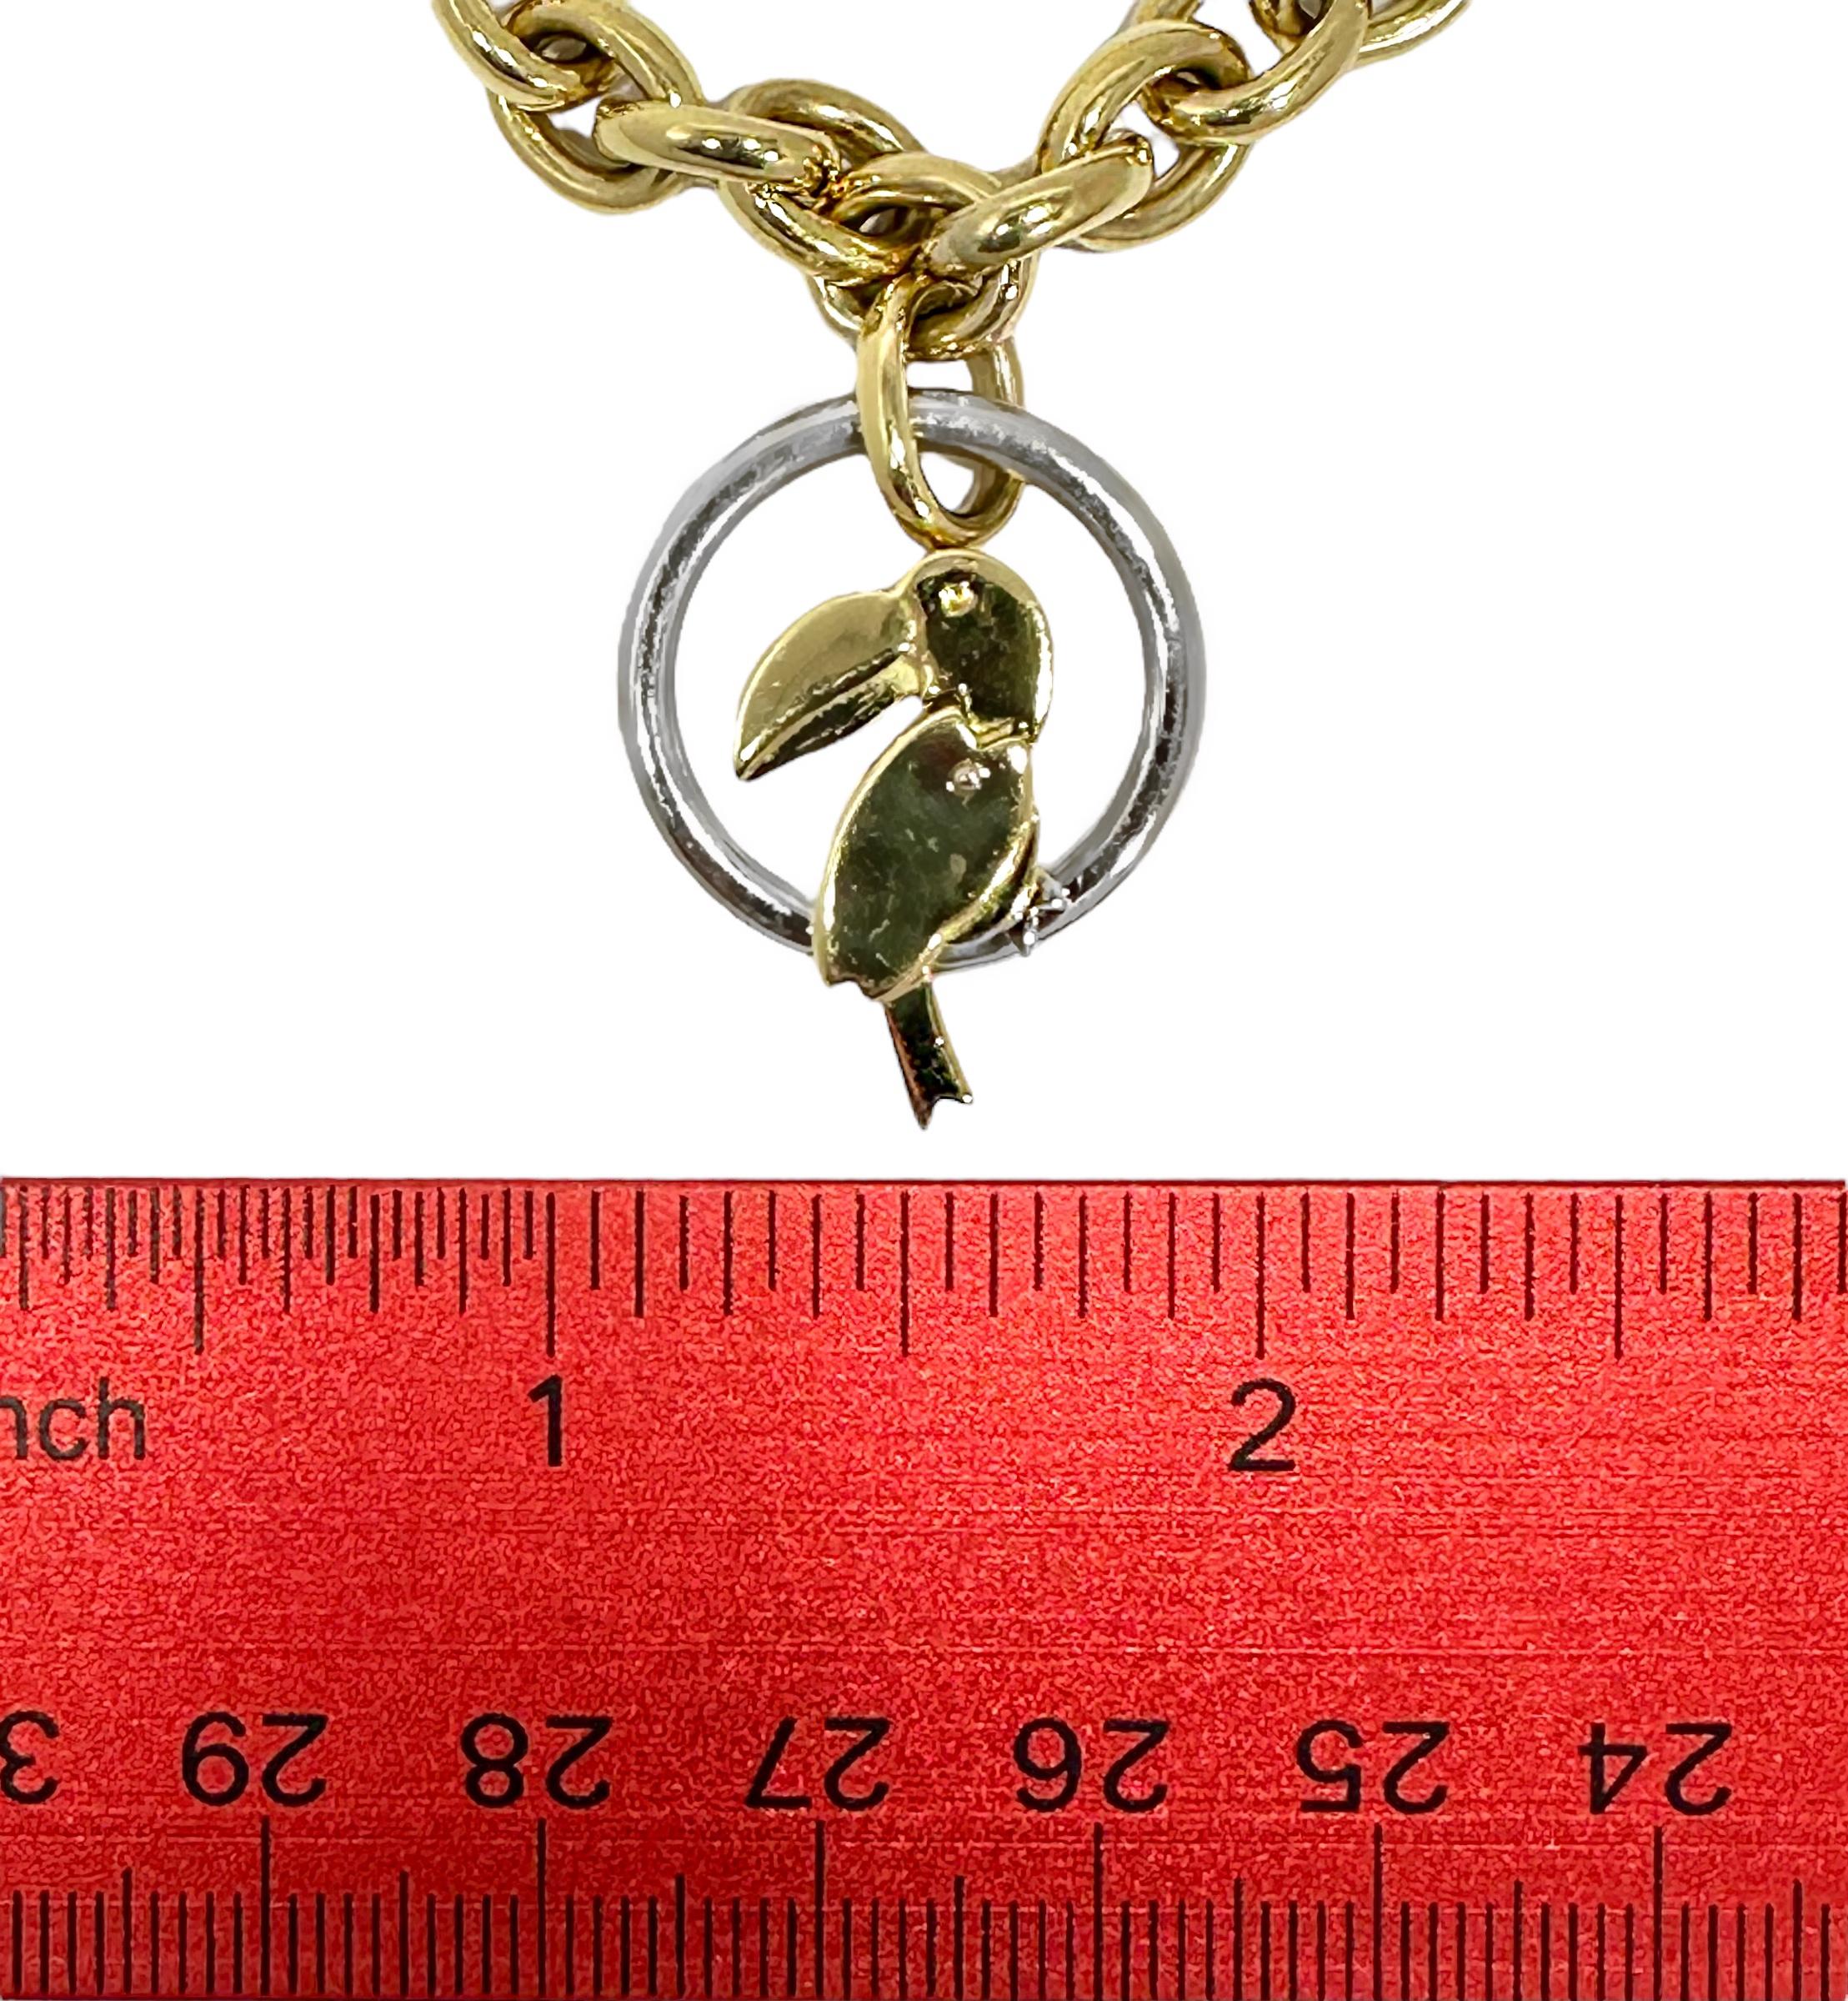 Women's 18k Gold 15 Inch Necklace with Aviary Theme Made from 2 Bracelets by Pomellato  For Sale